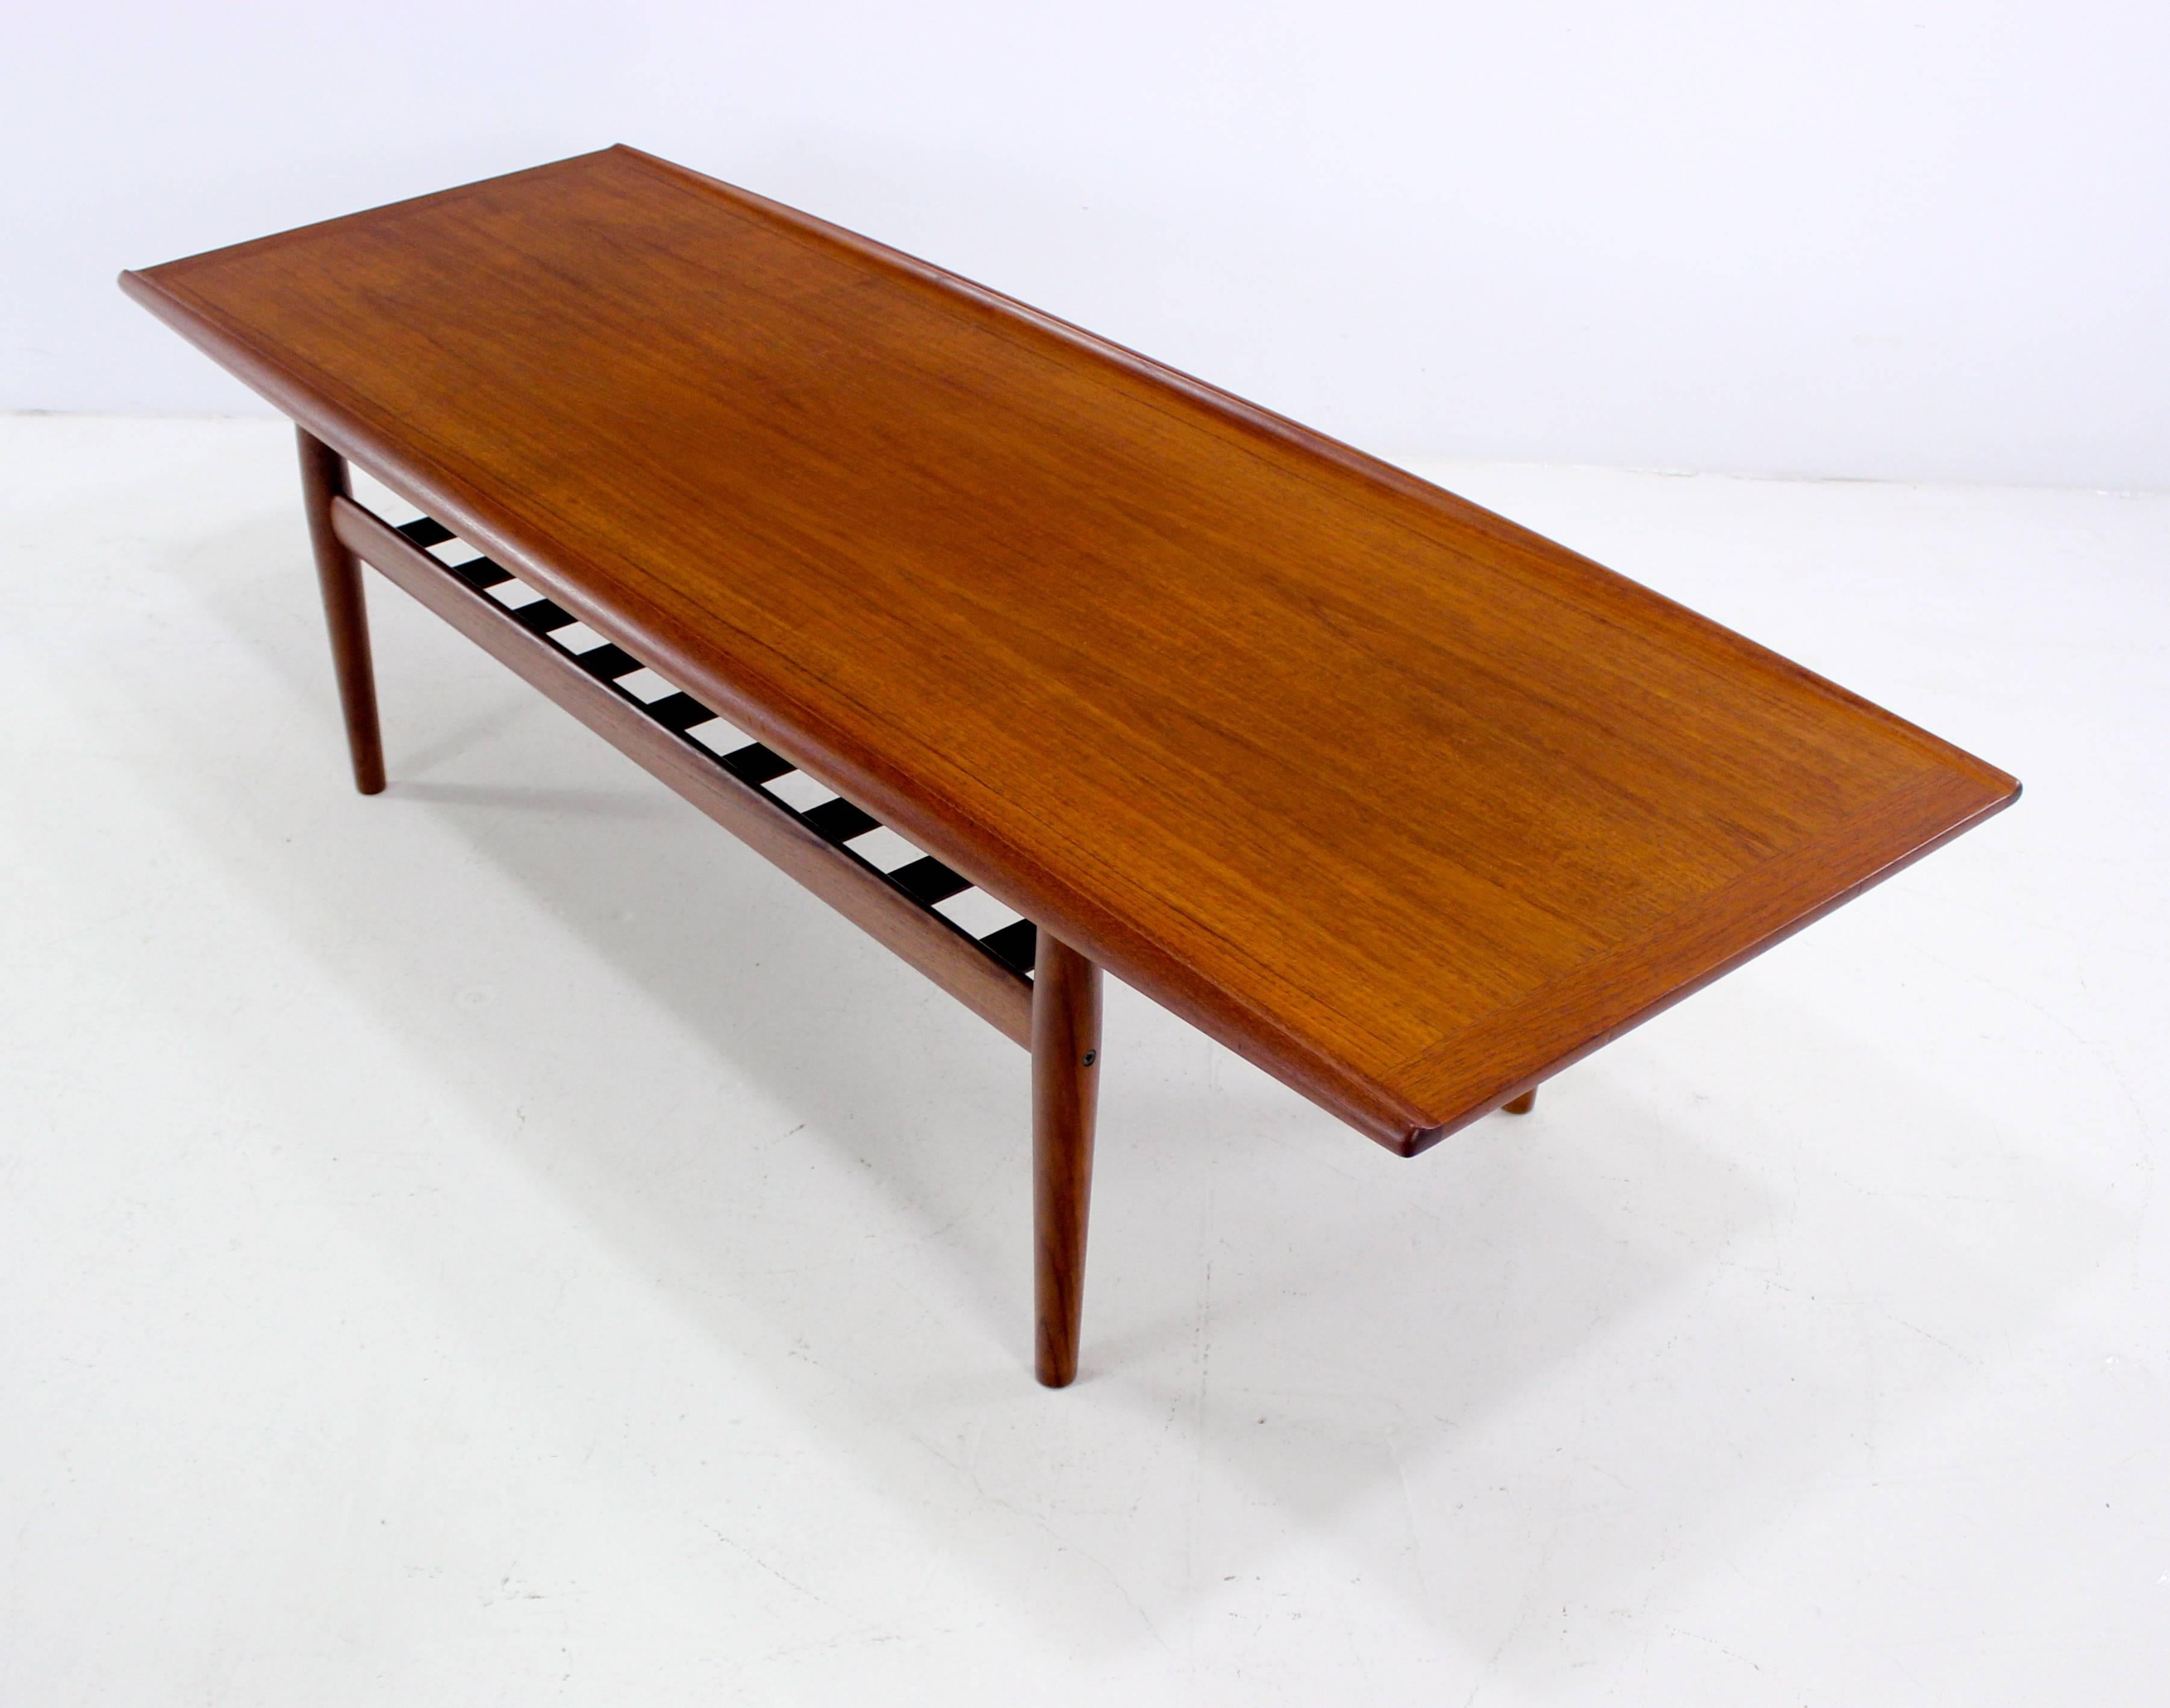 Three-Piece Solid Teak Danish Modern Tables Designed by Grete Jalk In Excellent Condition For Sale In Portland, OR